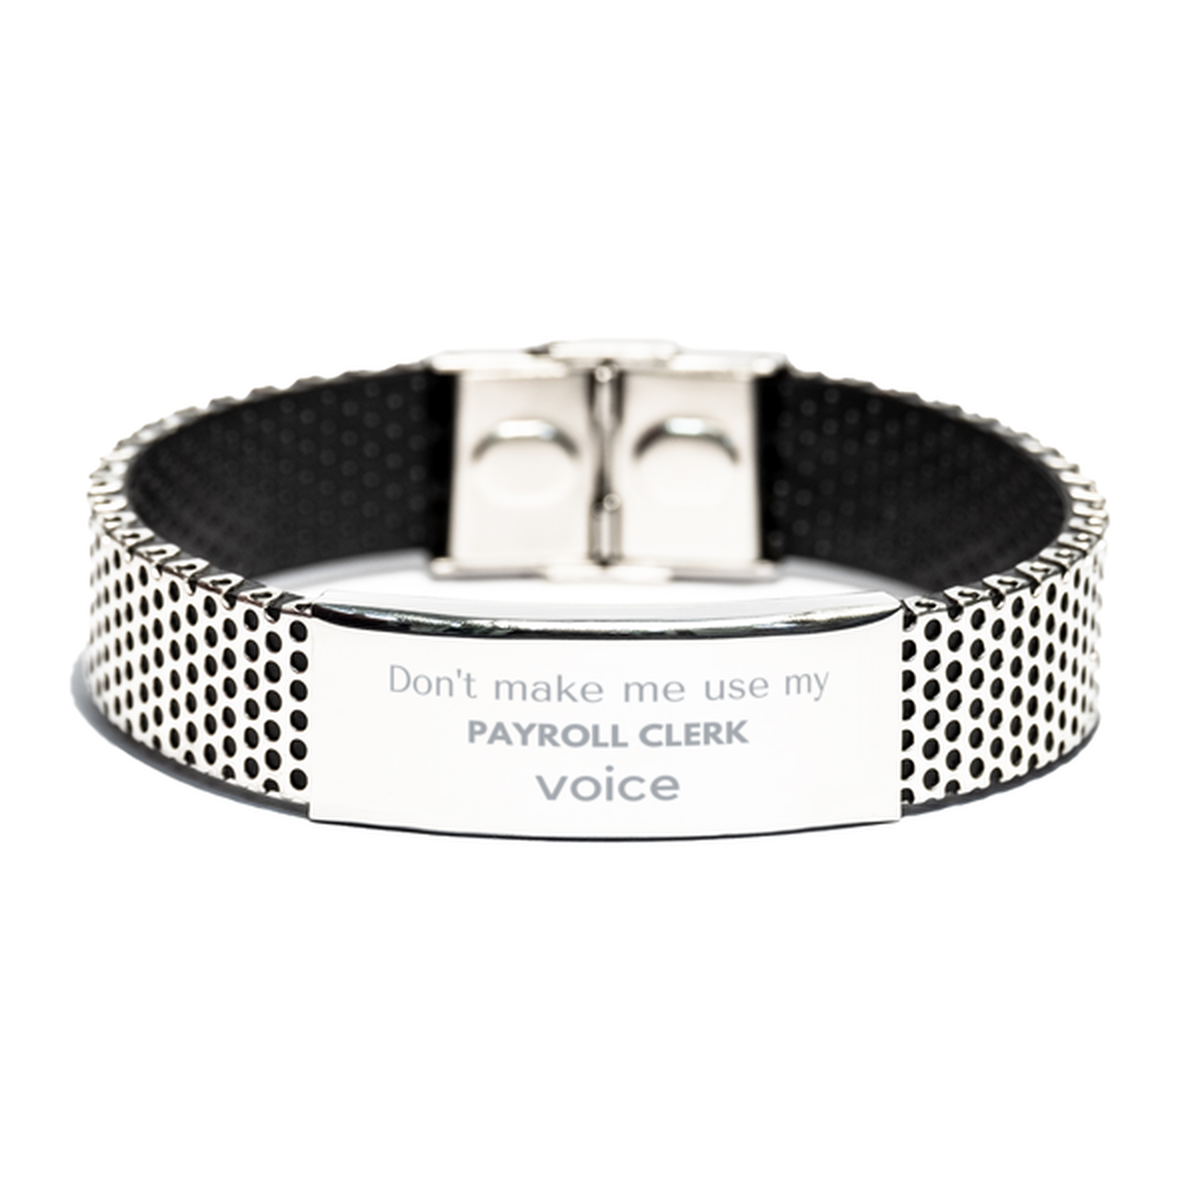 Don't make me use my Payroll Clerk voice, Sarcasm Payroll Clerk Gifts, Christmas Payroll Clerk Stainless Steel Bracelet Birthday Unique Gifts For Payroll Clerk Coworkers, Men, Women, Colleague, Friends